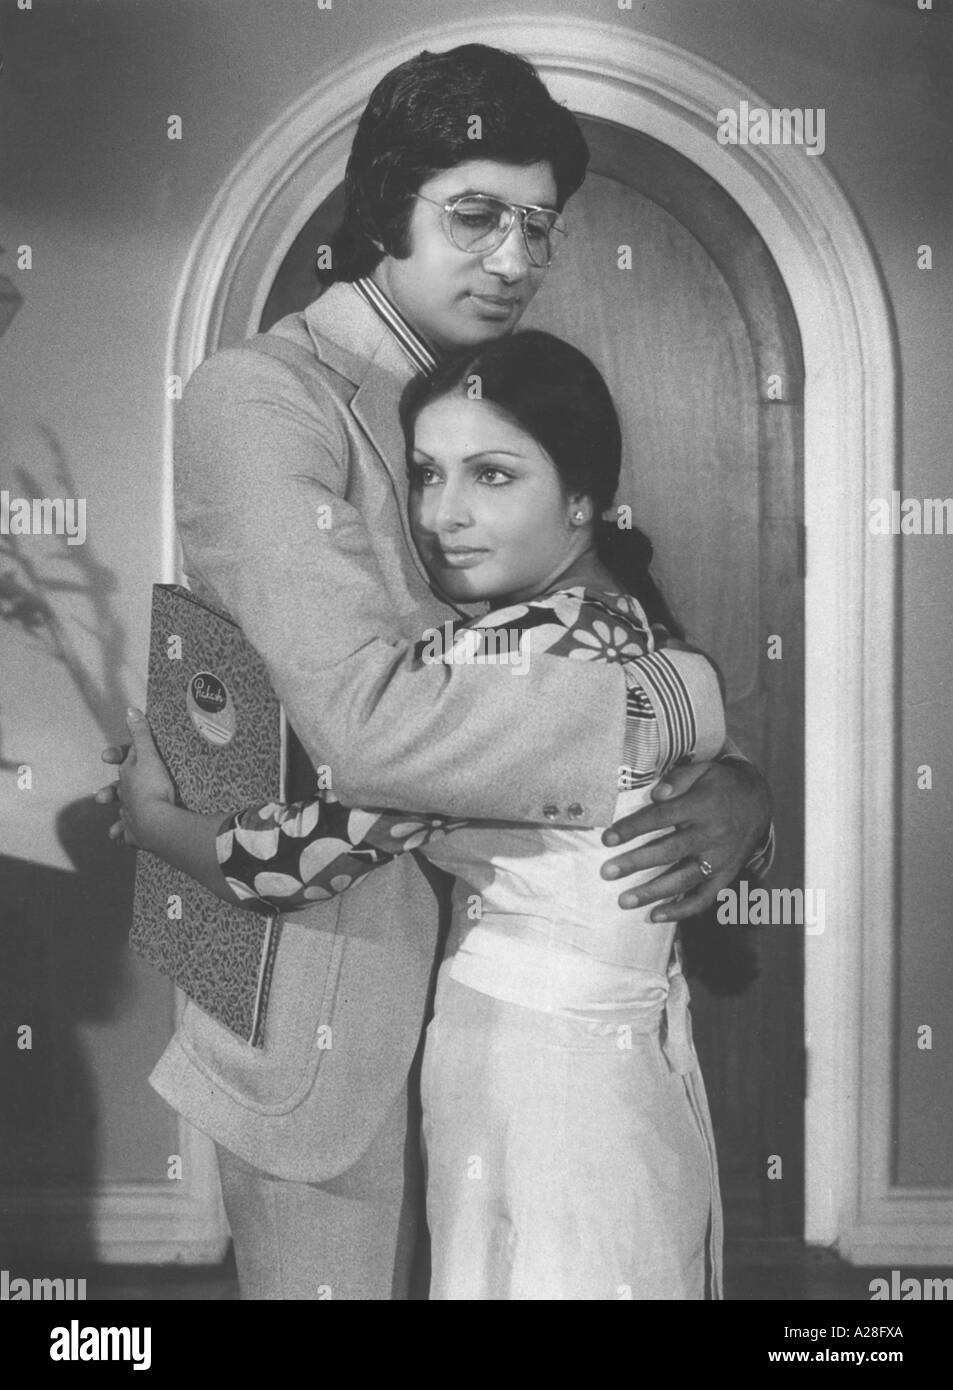 Indian Bollywood Film Star Actor Amitabh Bachchan with Rakhi in film Kasme Vade India Stock Photo